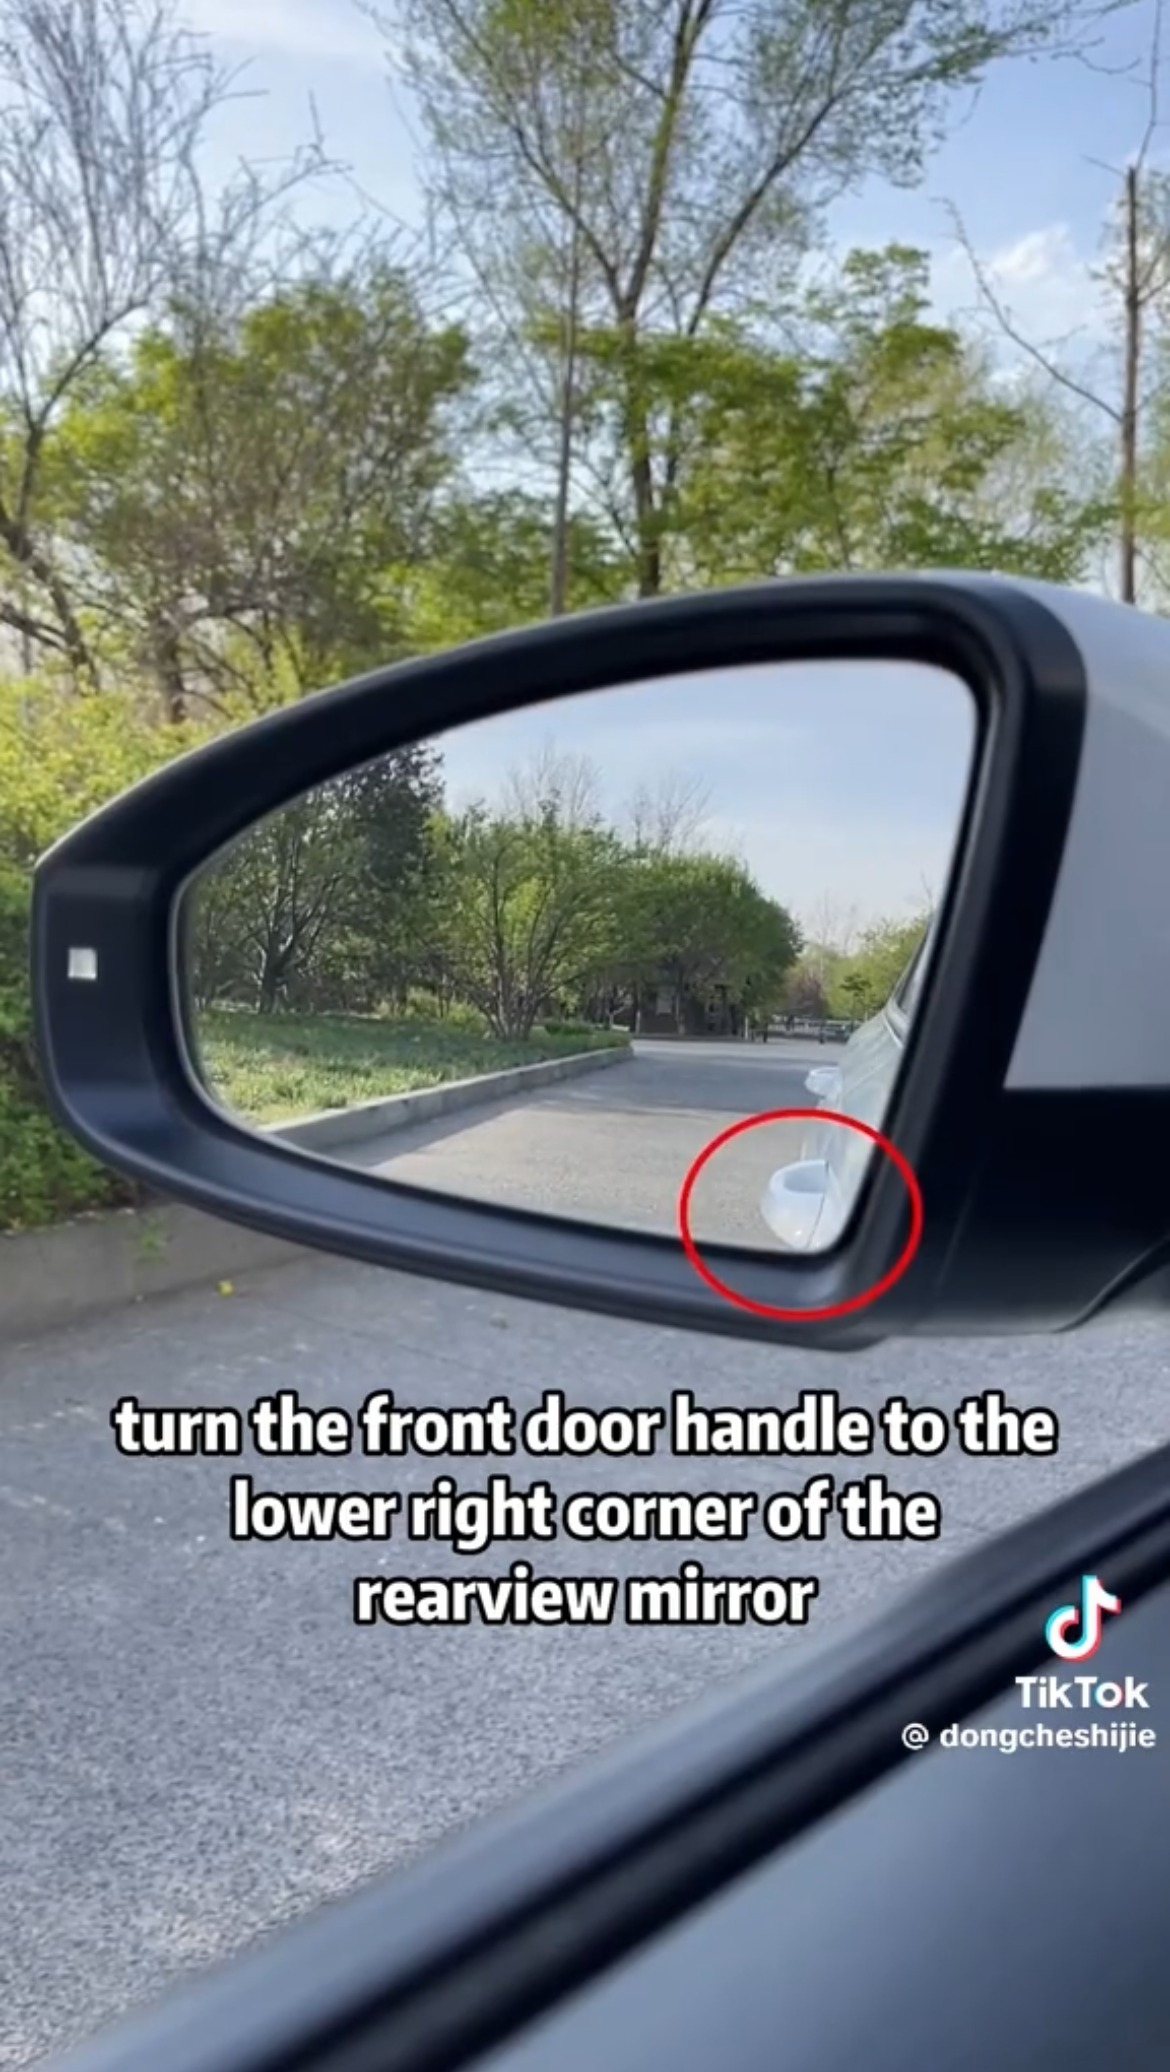 She also explains how to get the most out of your mirrors by aligning them with your handles